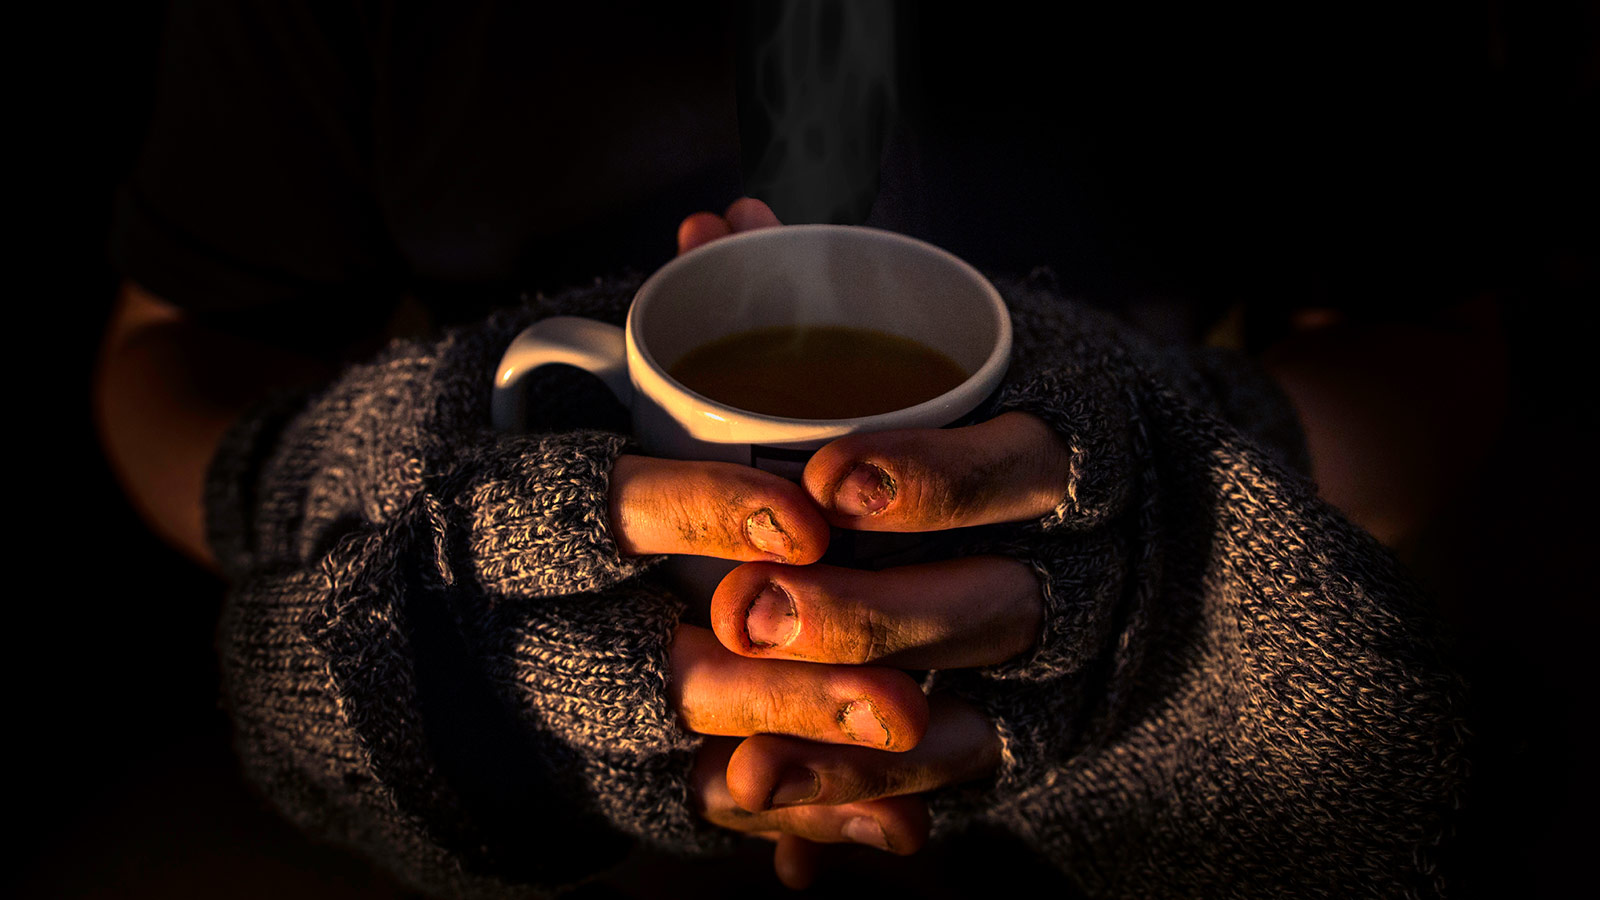 Homeless person holding a cup